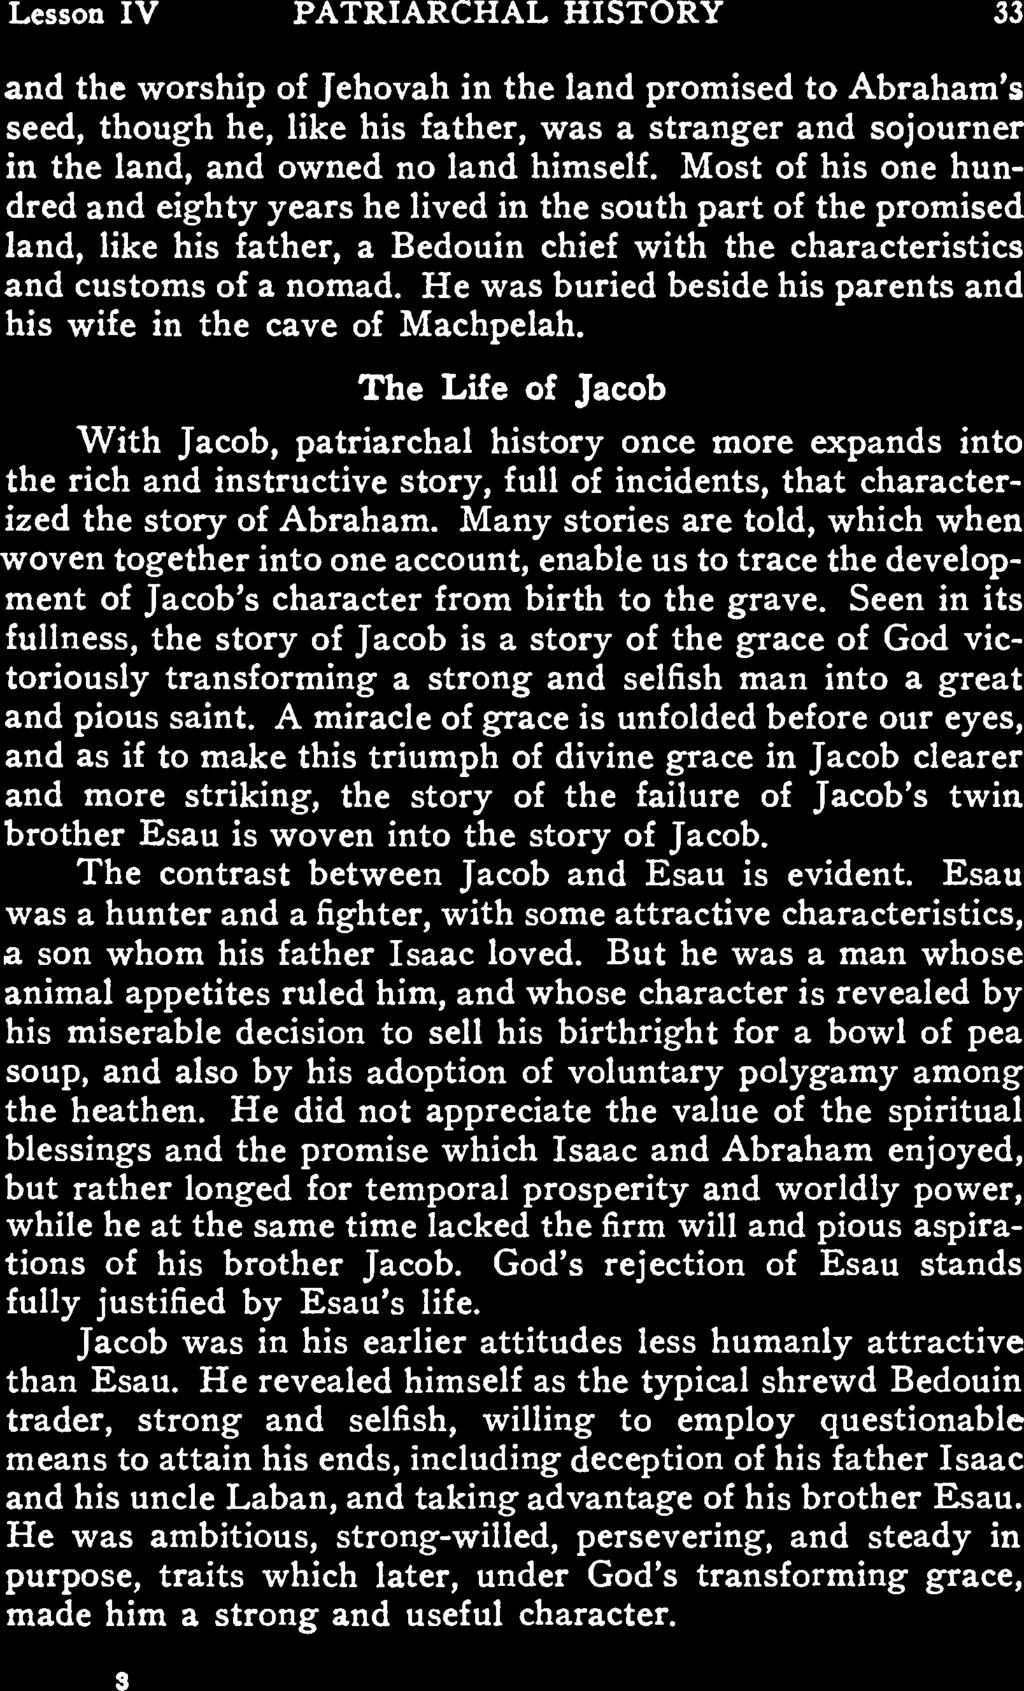 Lesson IV PATRIARCHAL HISTORY 33 nd the worship of Jehovh in the lnd promised to Abrhm s seed, though he, like his fther, ws strnger nd sojourner in the lnd, nd owned no lnd himself.